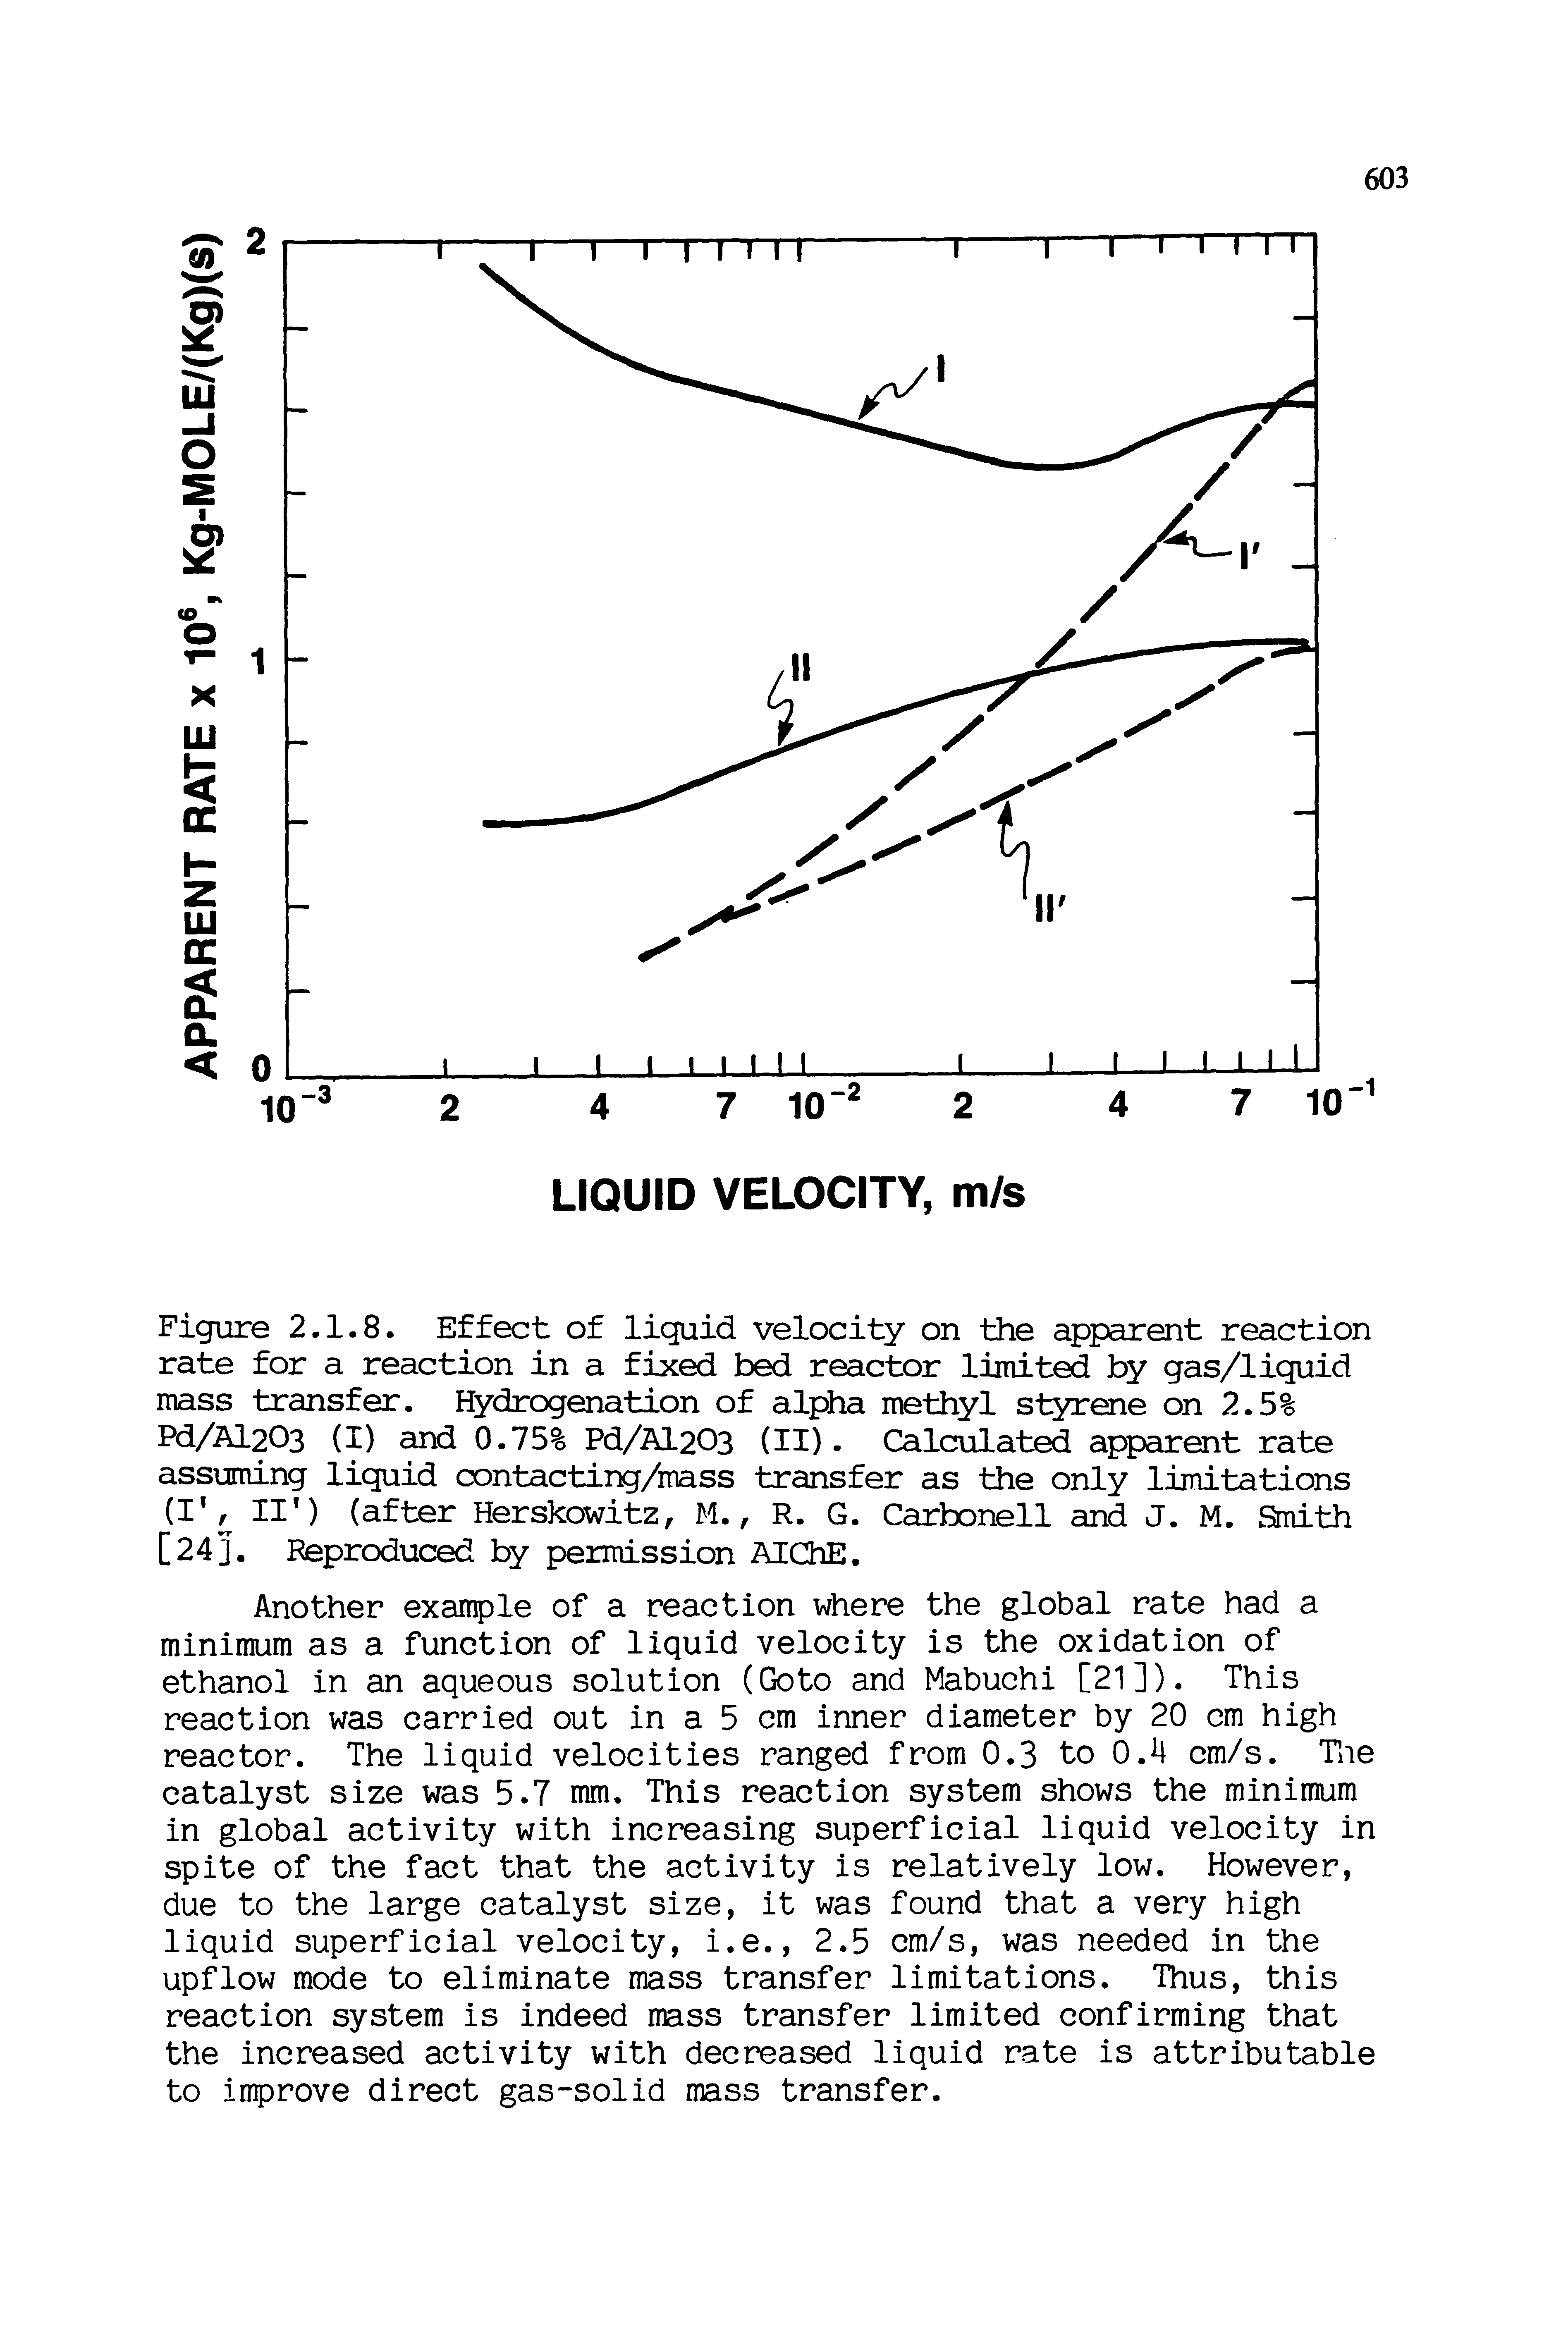 Figure 2.1.8. Effect of liquid velocity on the apparent reaction rate for a reaction in a fixed bed reactor limited by gas/liquid mass transfer. Hydrogenation of alpha methyl styrene on 2.5% Pd/Al203 (p and 0.75% Pd/Al203 (II). Calculated apparent rate assuming liquid contacting/mass transfer as the only limitations (I, II ) (after Herskowitz, M., R. G. Carbonell and J. M. Smith [24J. Reproduced permission AIChE.